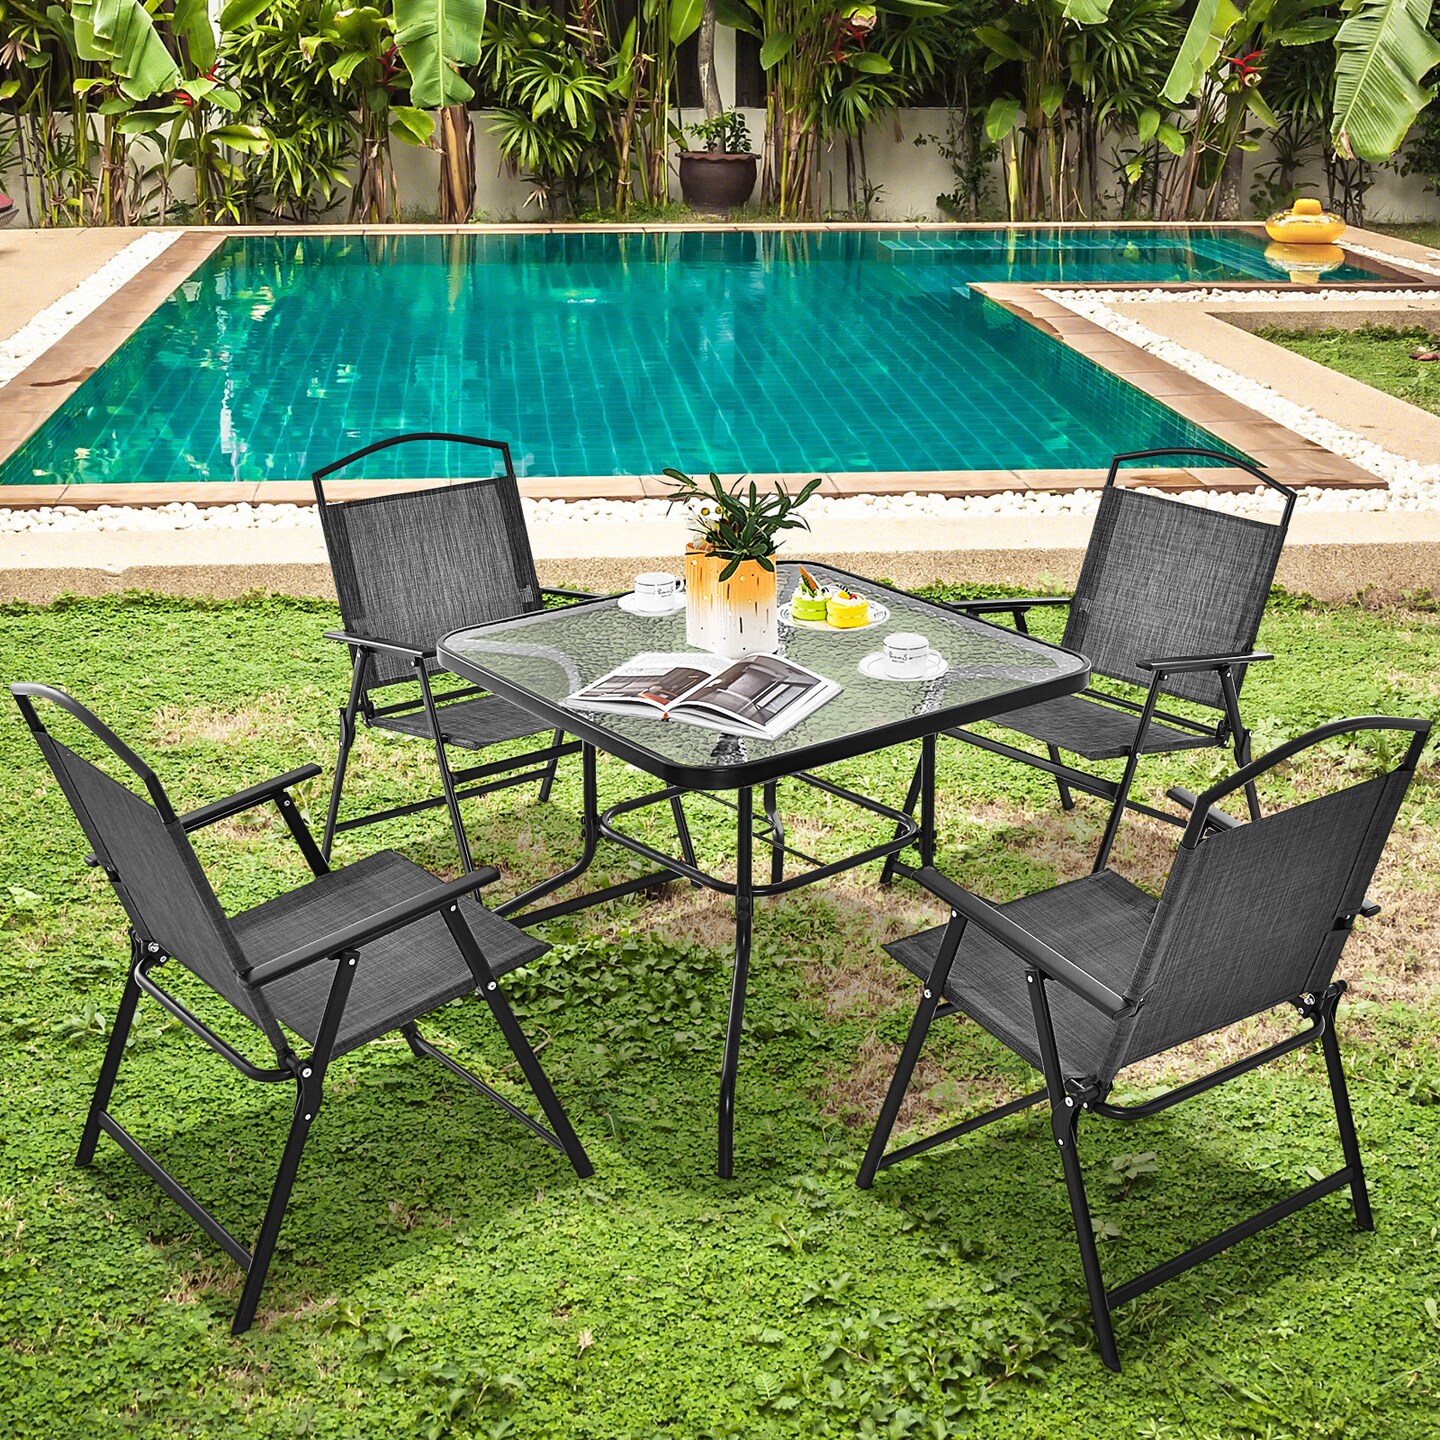 Patio Dining Set For 4 With Umbrella Hole-gray